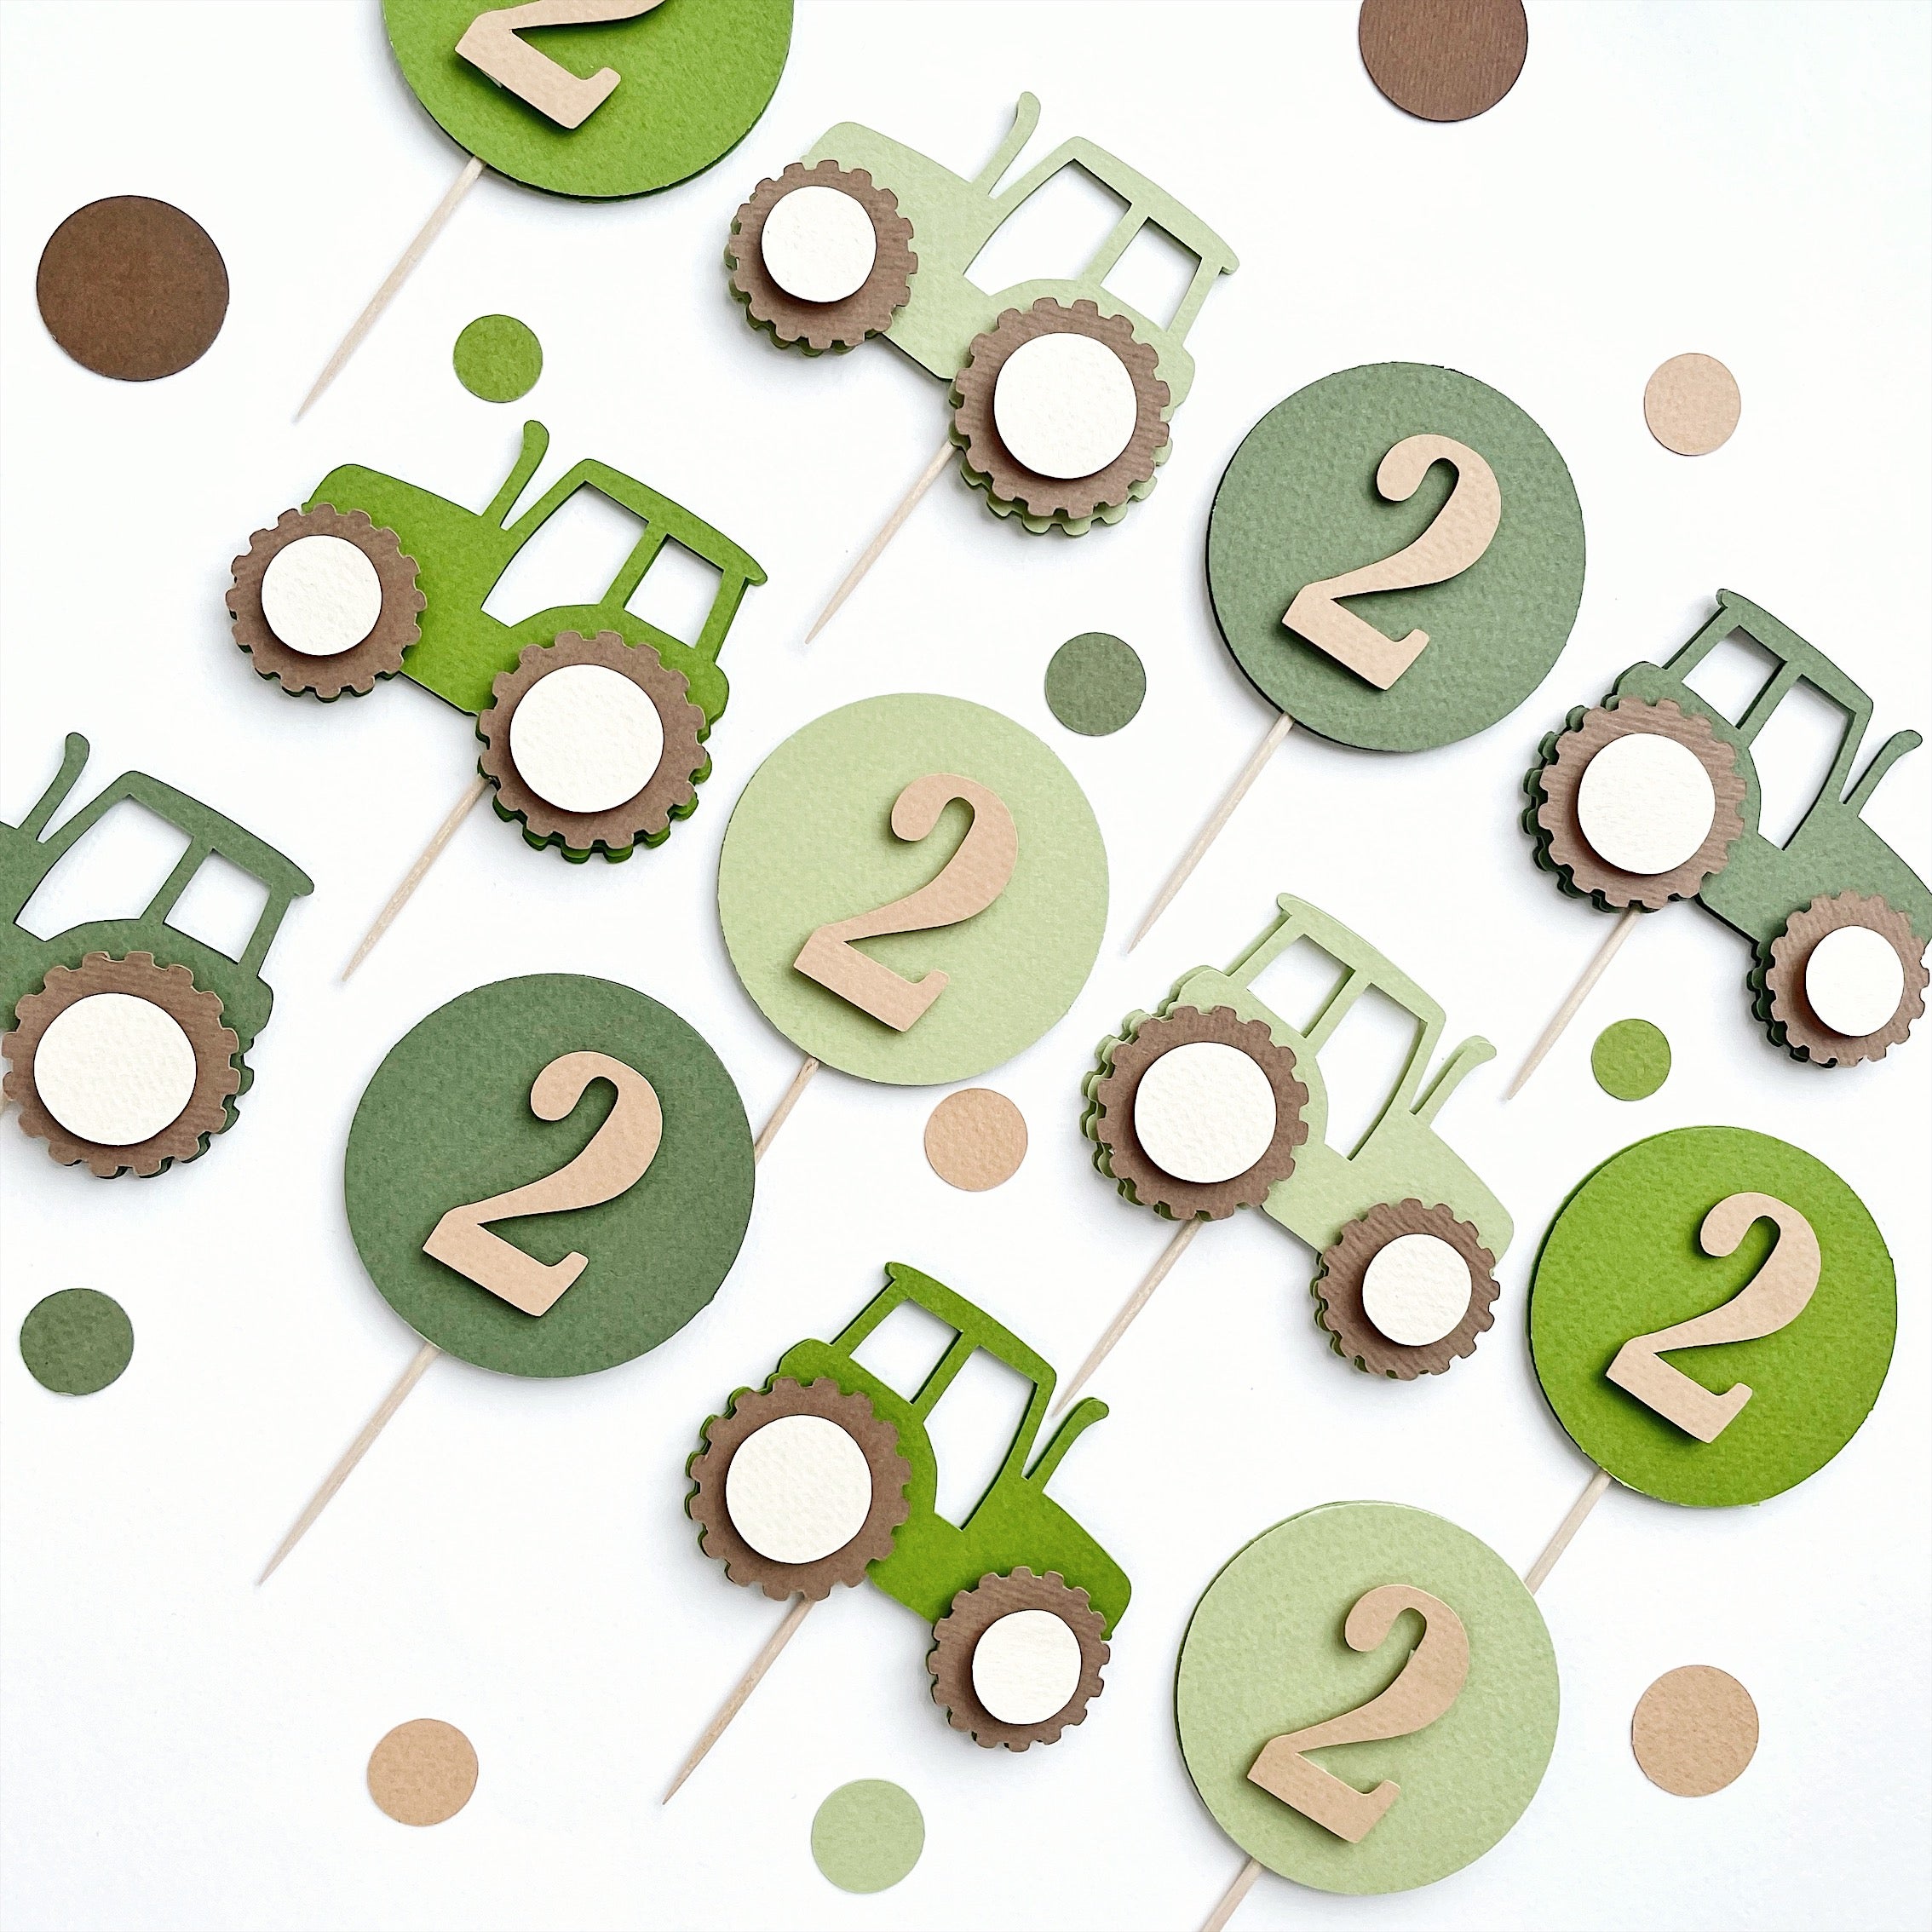 Tractor Cupcake Toppers Tractor Decorations by FUNSTACRAFT Farm theme Birthday